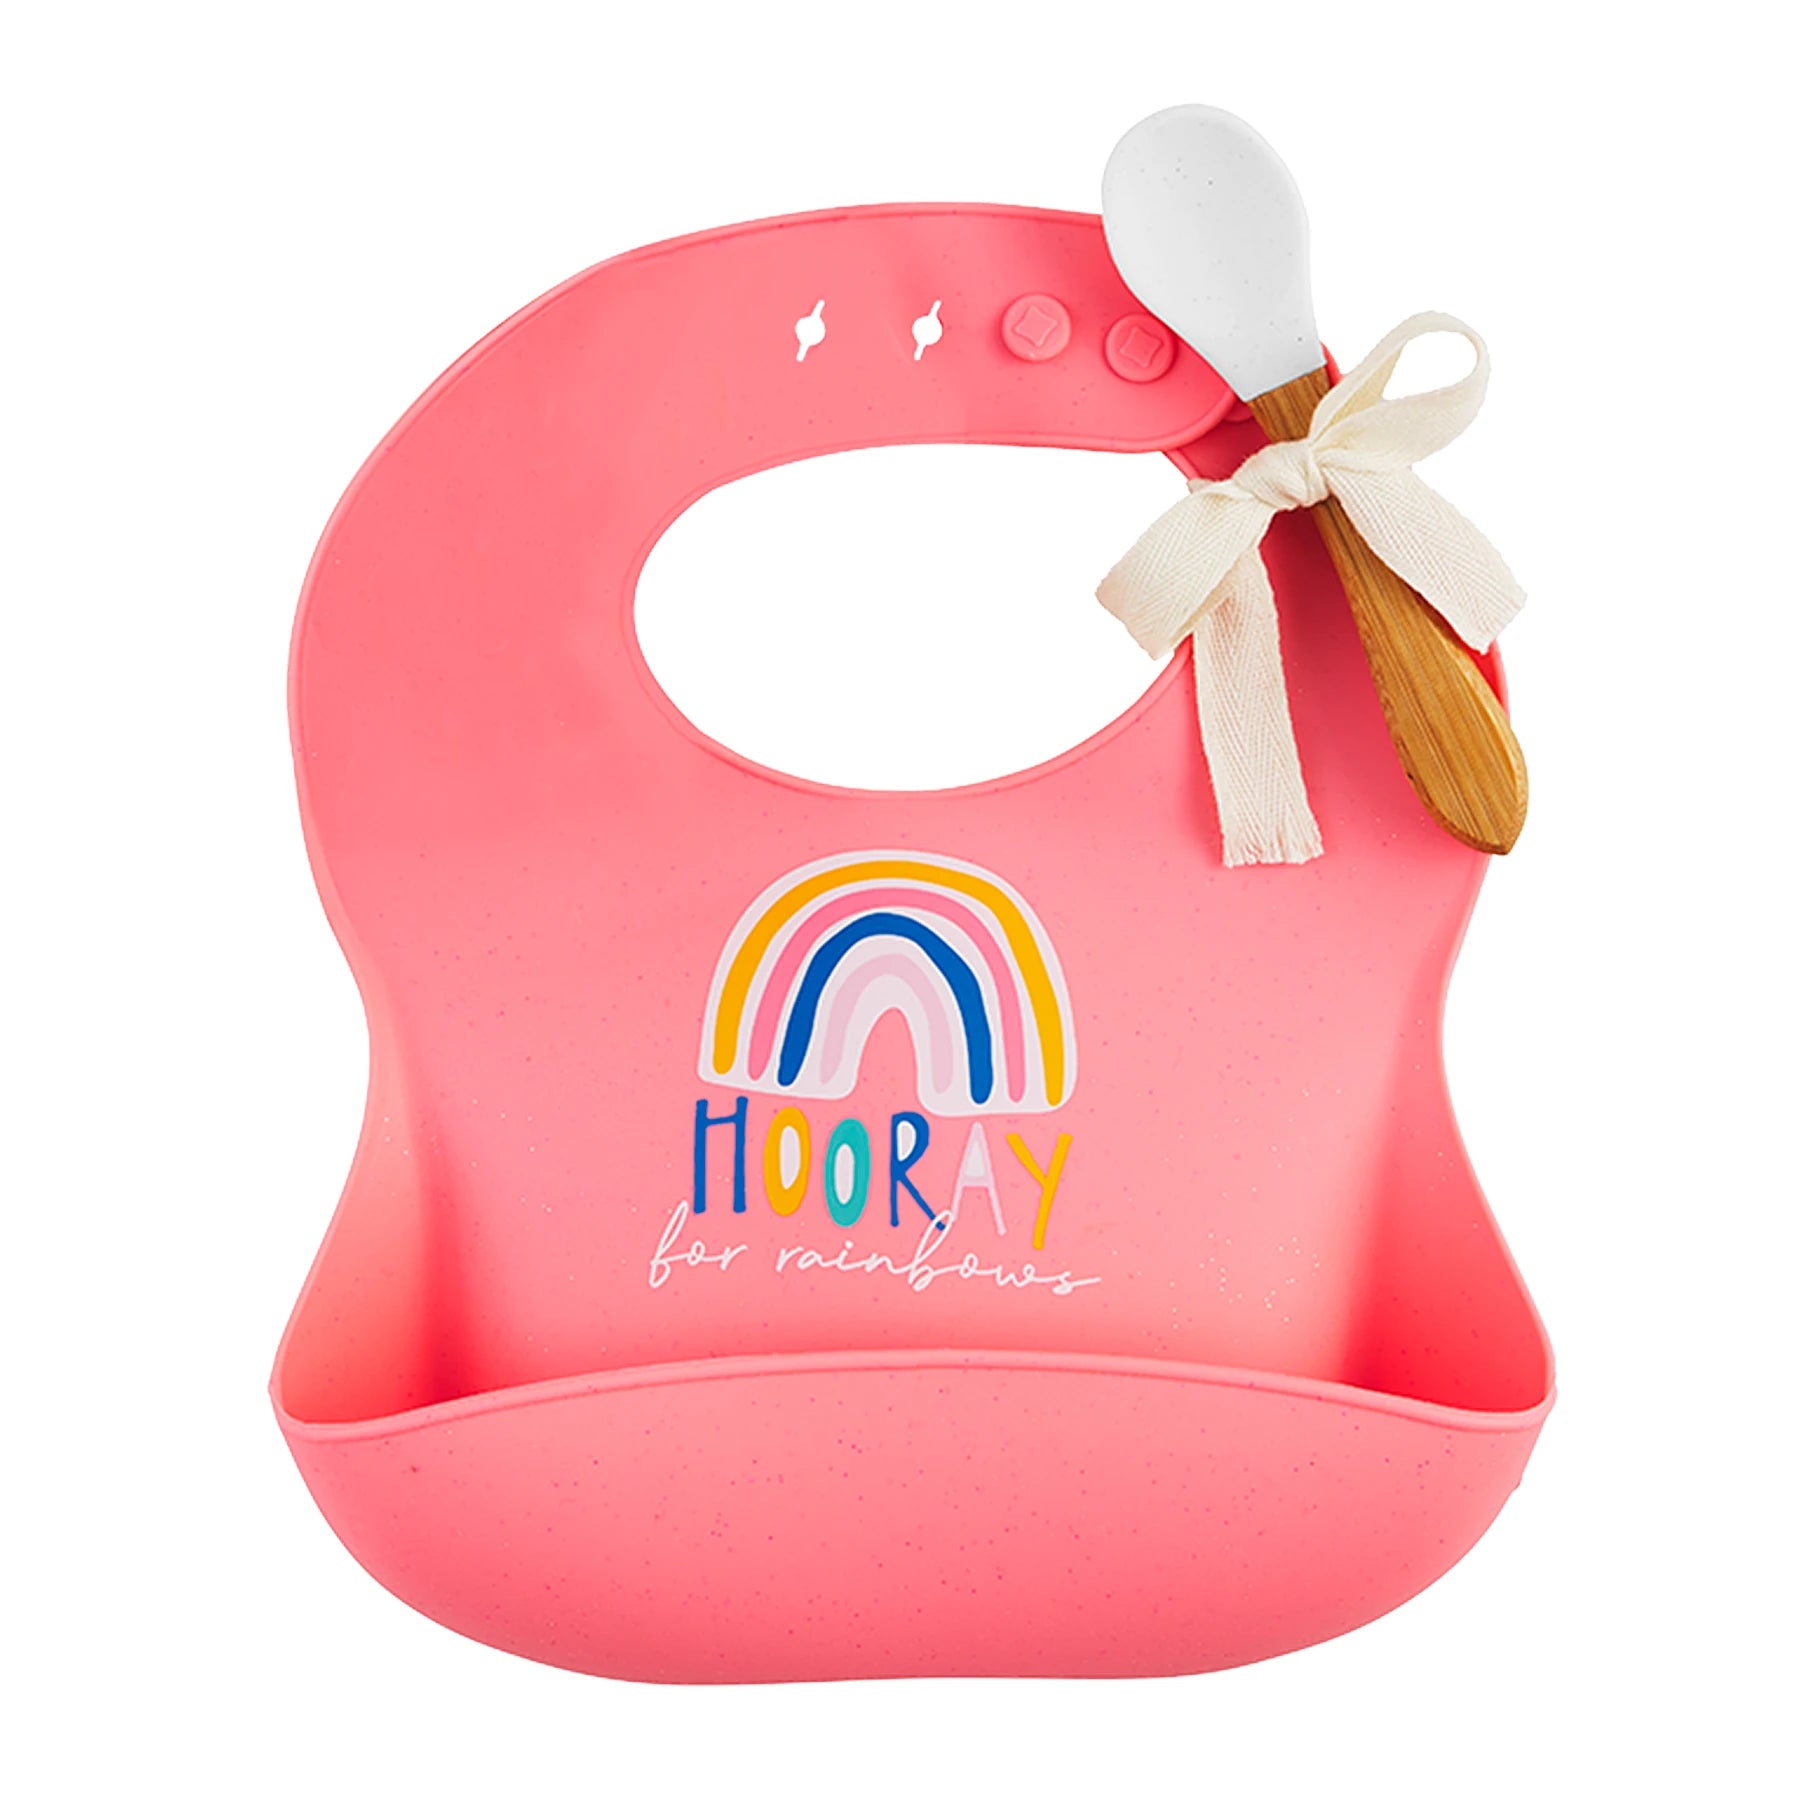 pink silicone bib with pocket on the front, a rainbow graphic, "hooray for rainbows", and wooden spoon with silicone head tied to it.